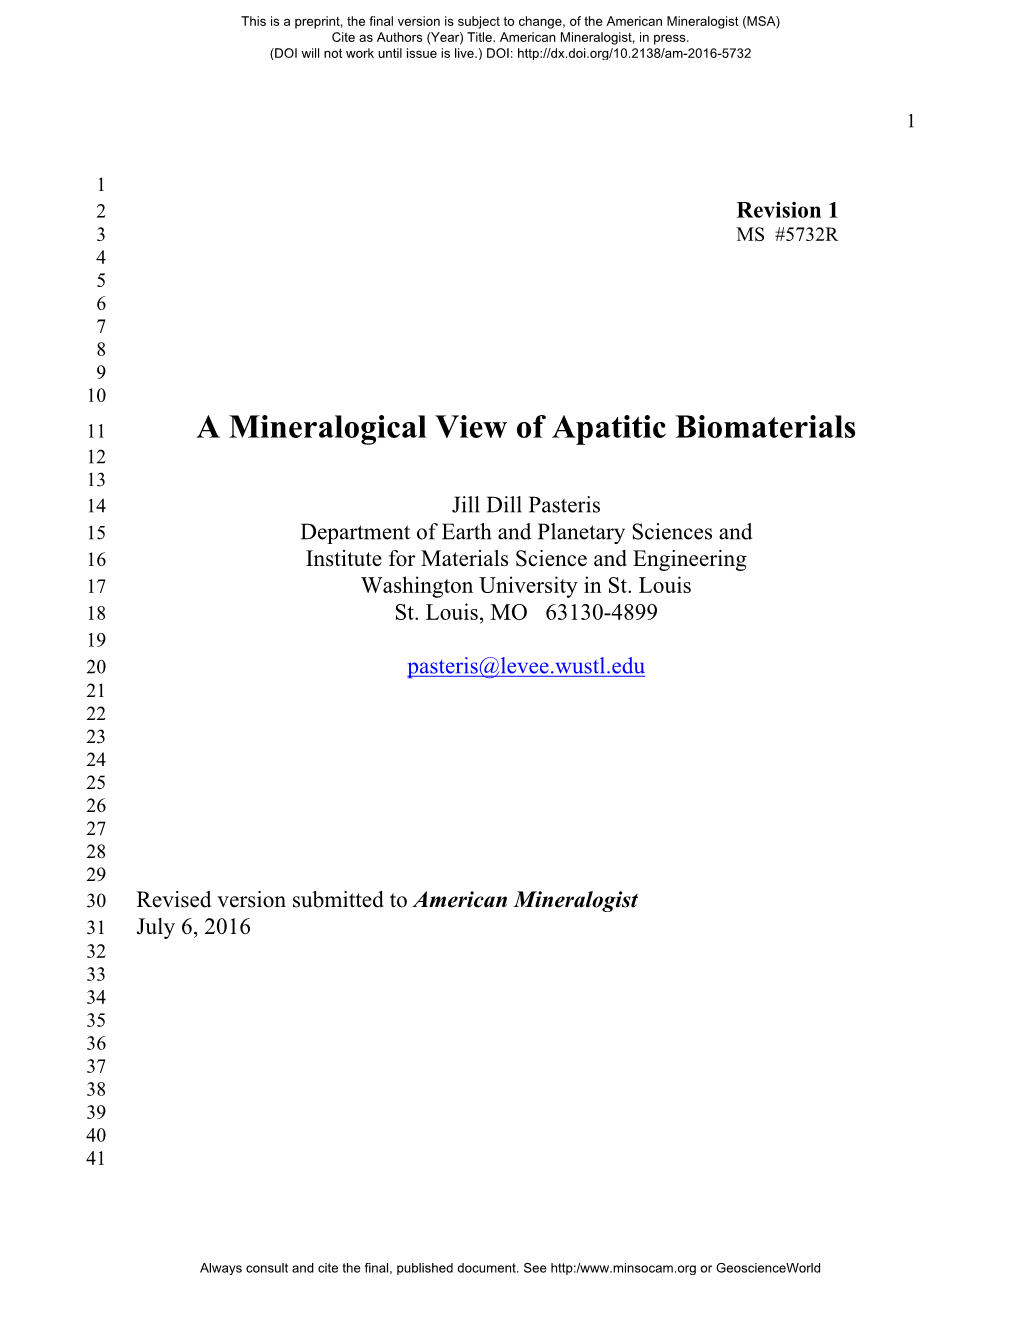 A Mineralogical View of Apatitic Biomaterials